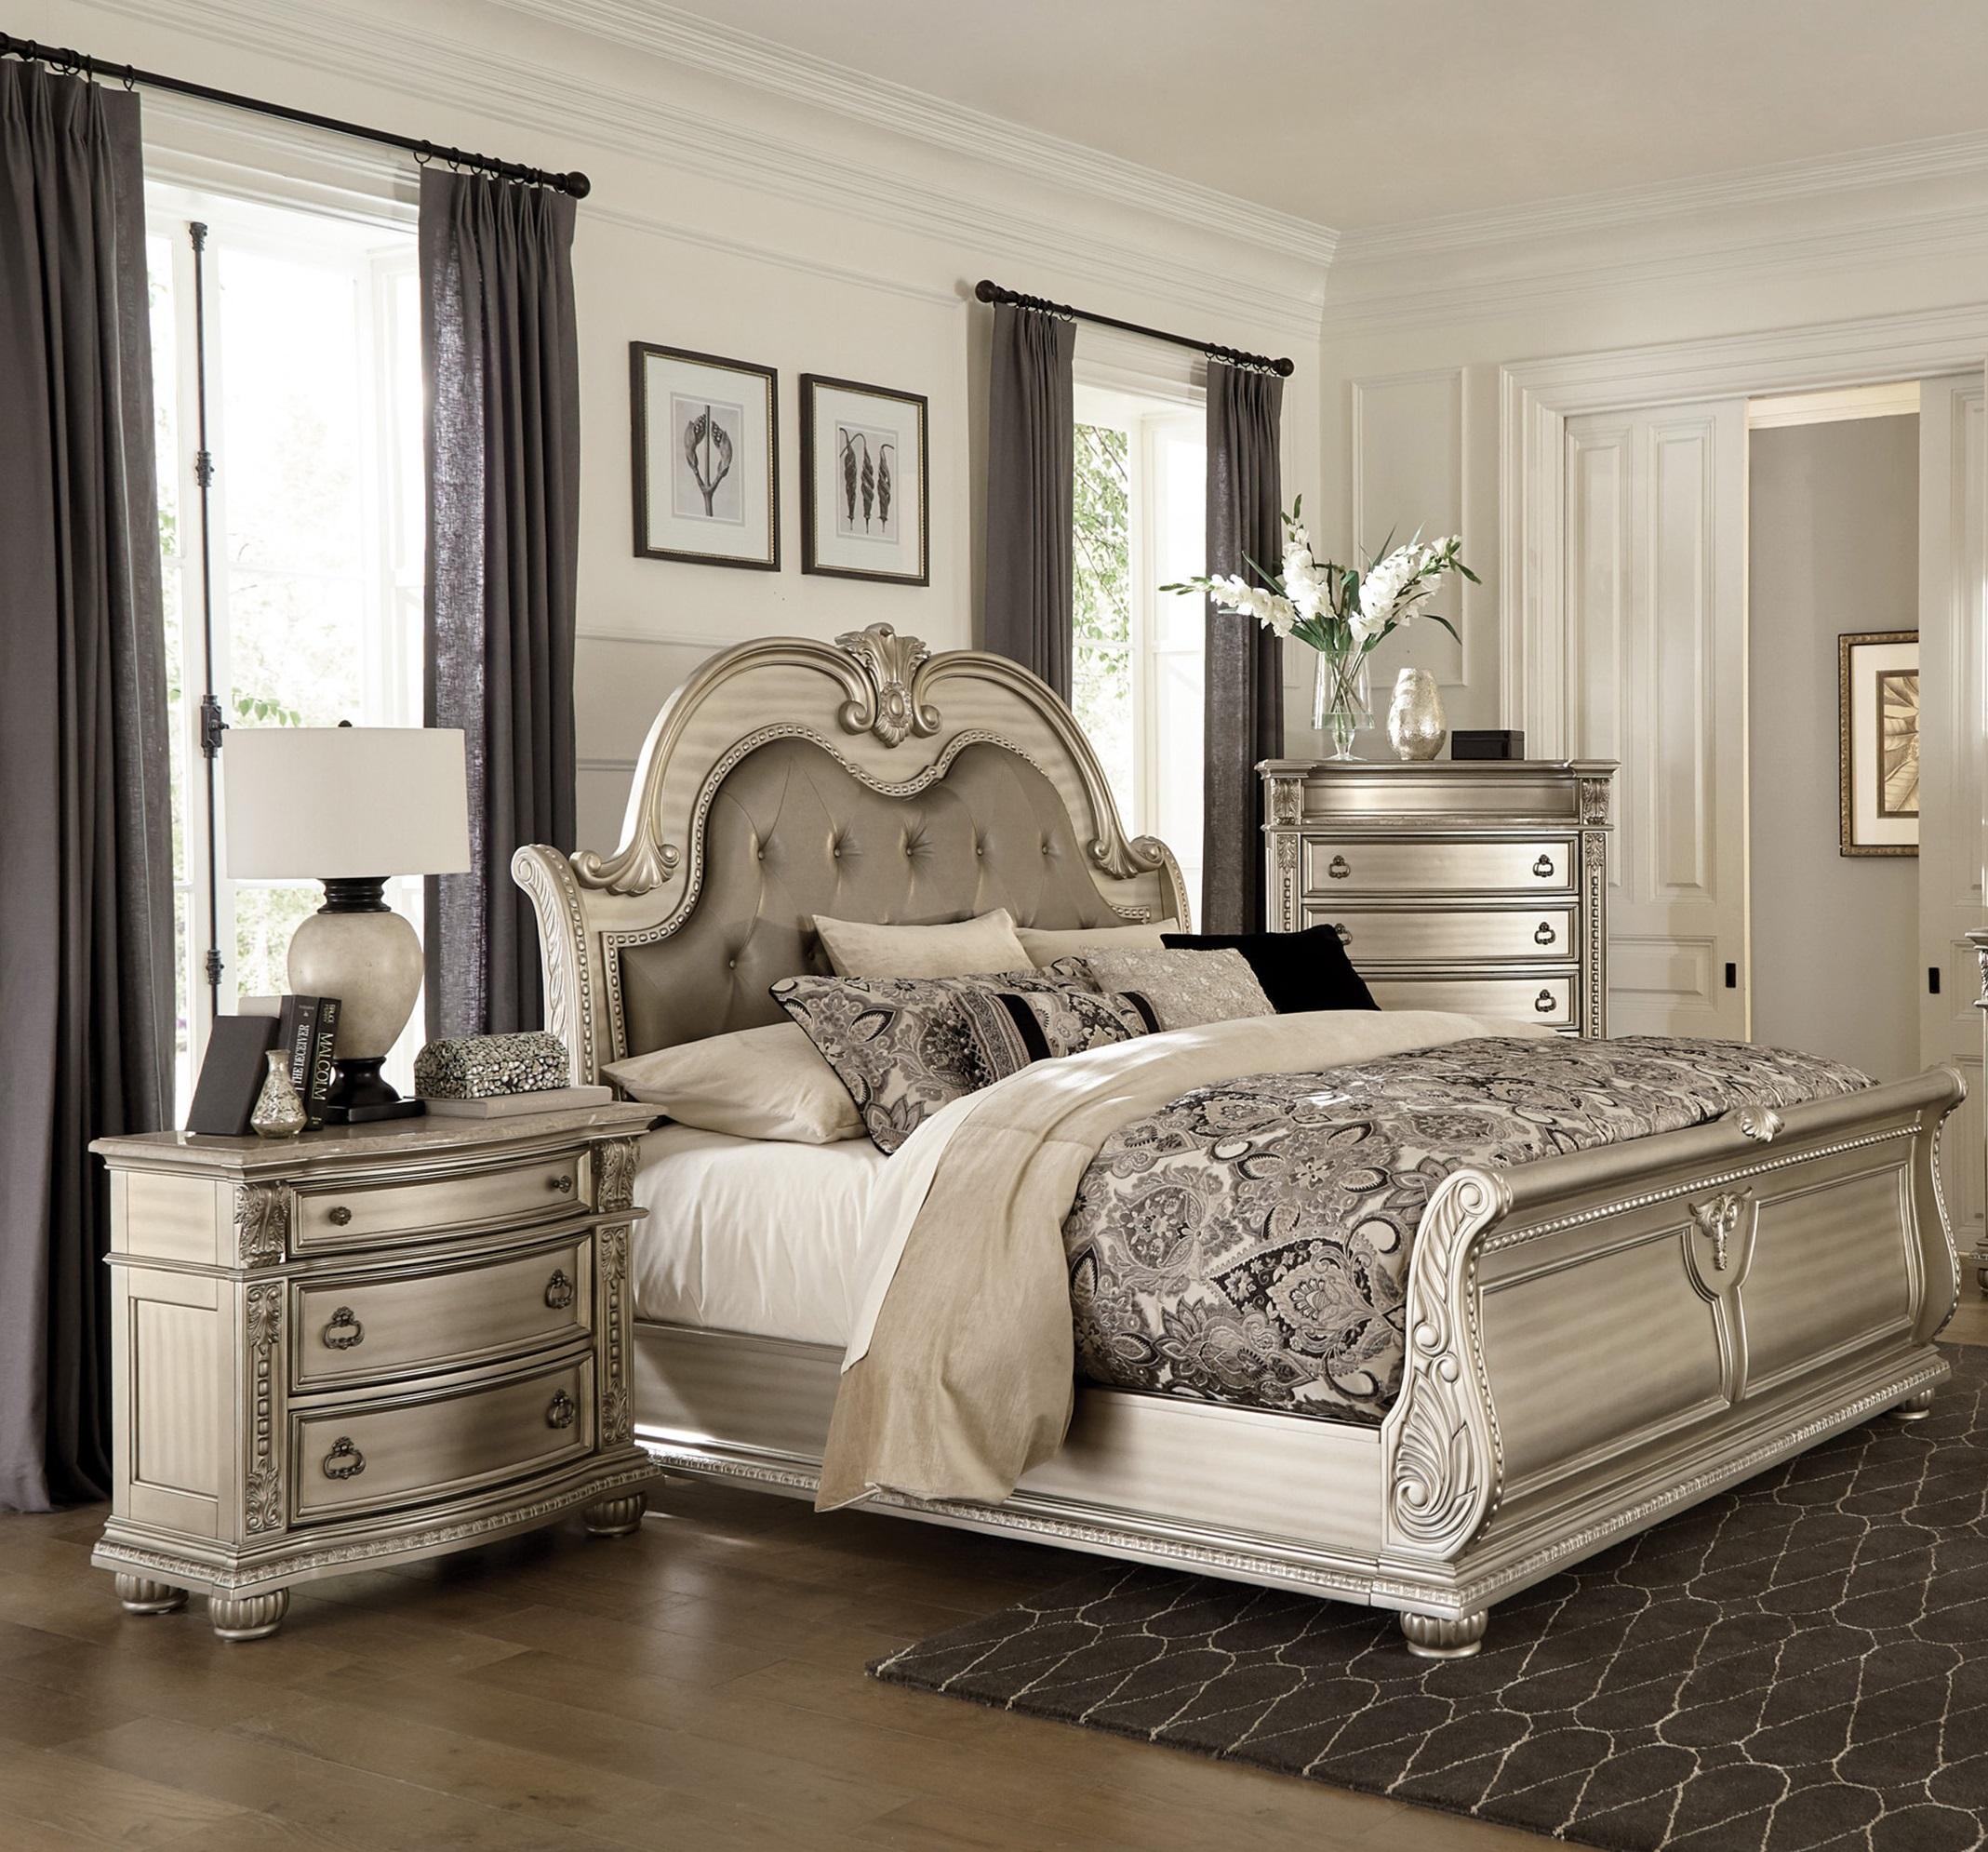 Classic Bedroom Set 1757SV-1-3PC Cavalier 1757SV-1-3PC in Silver Faux Leather